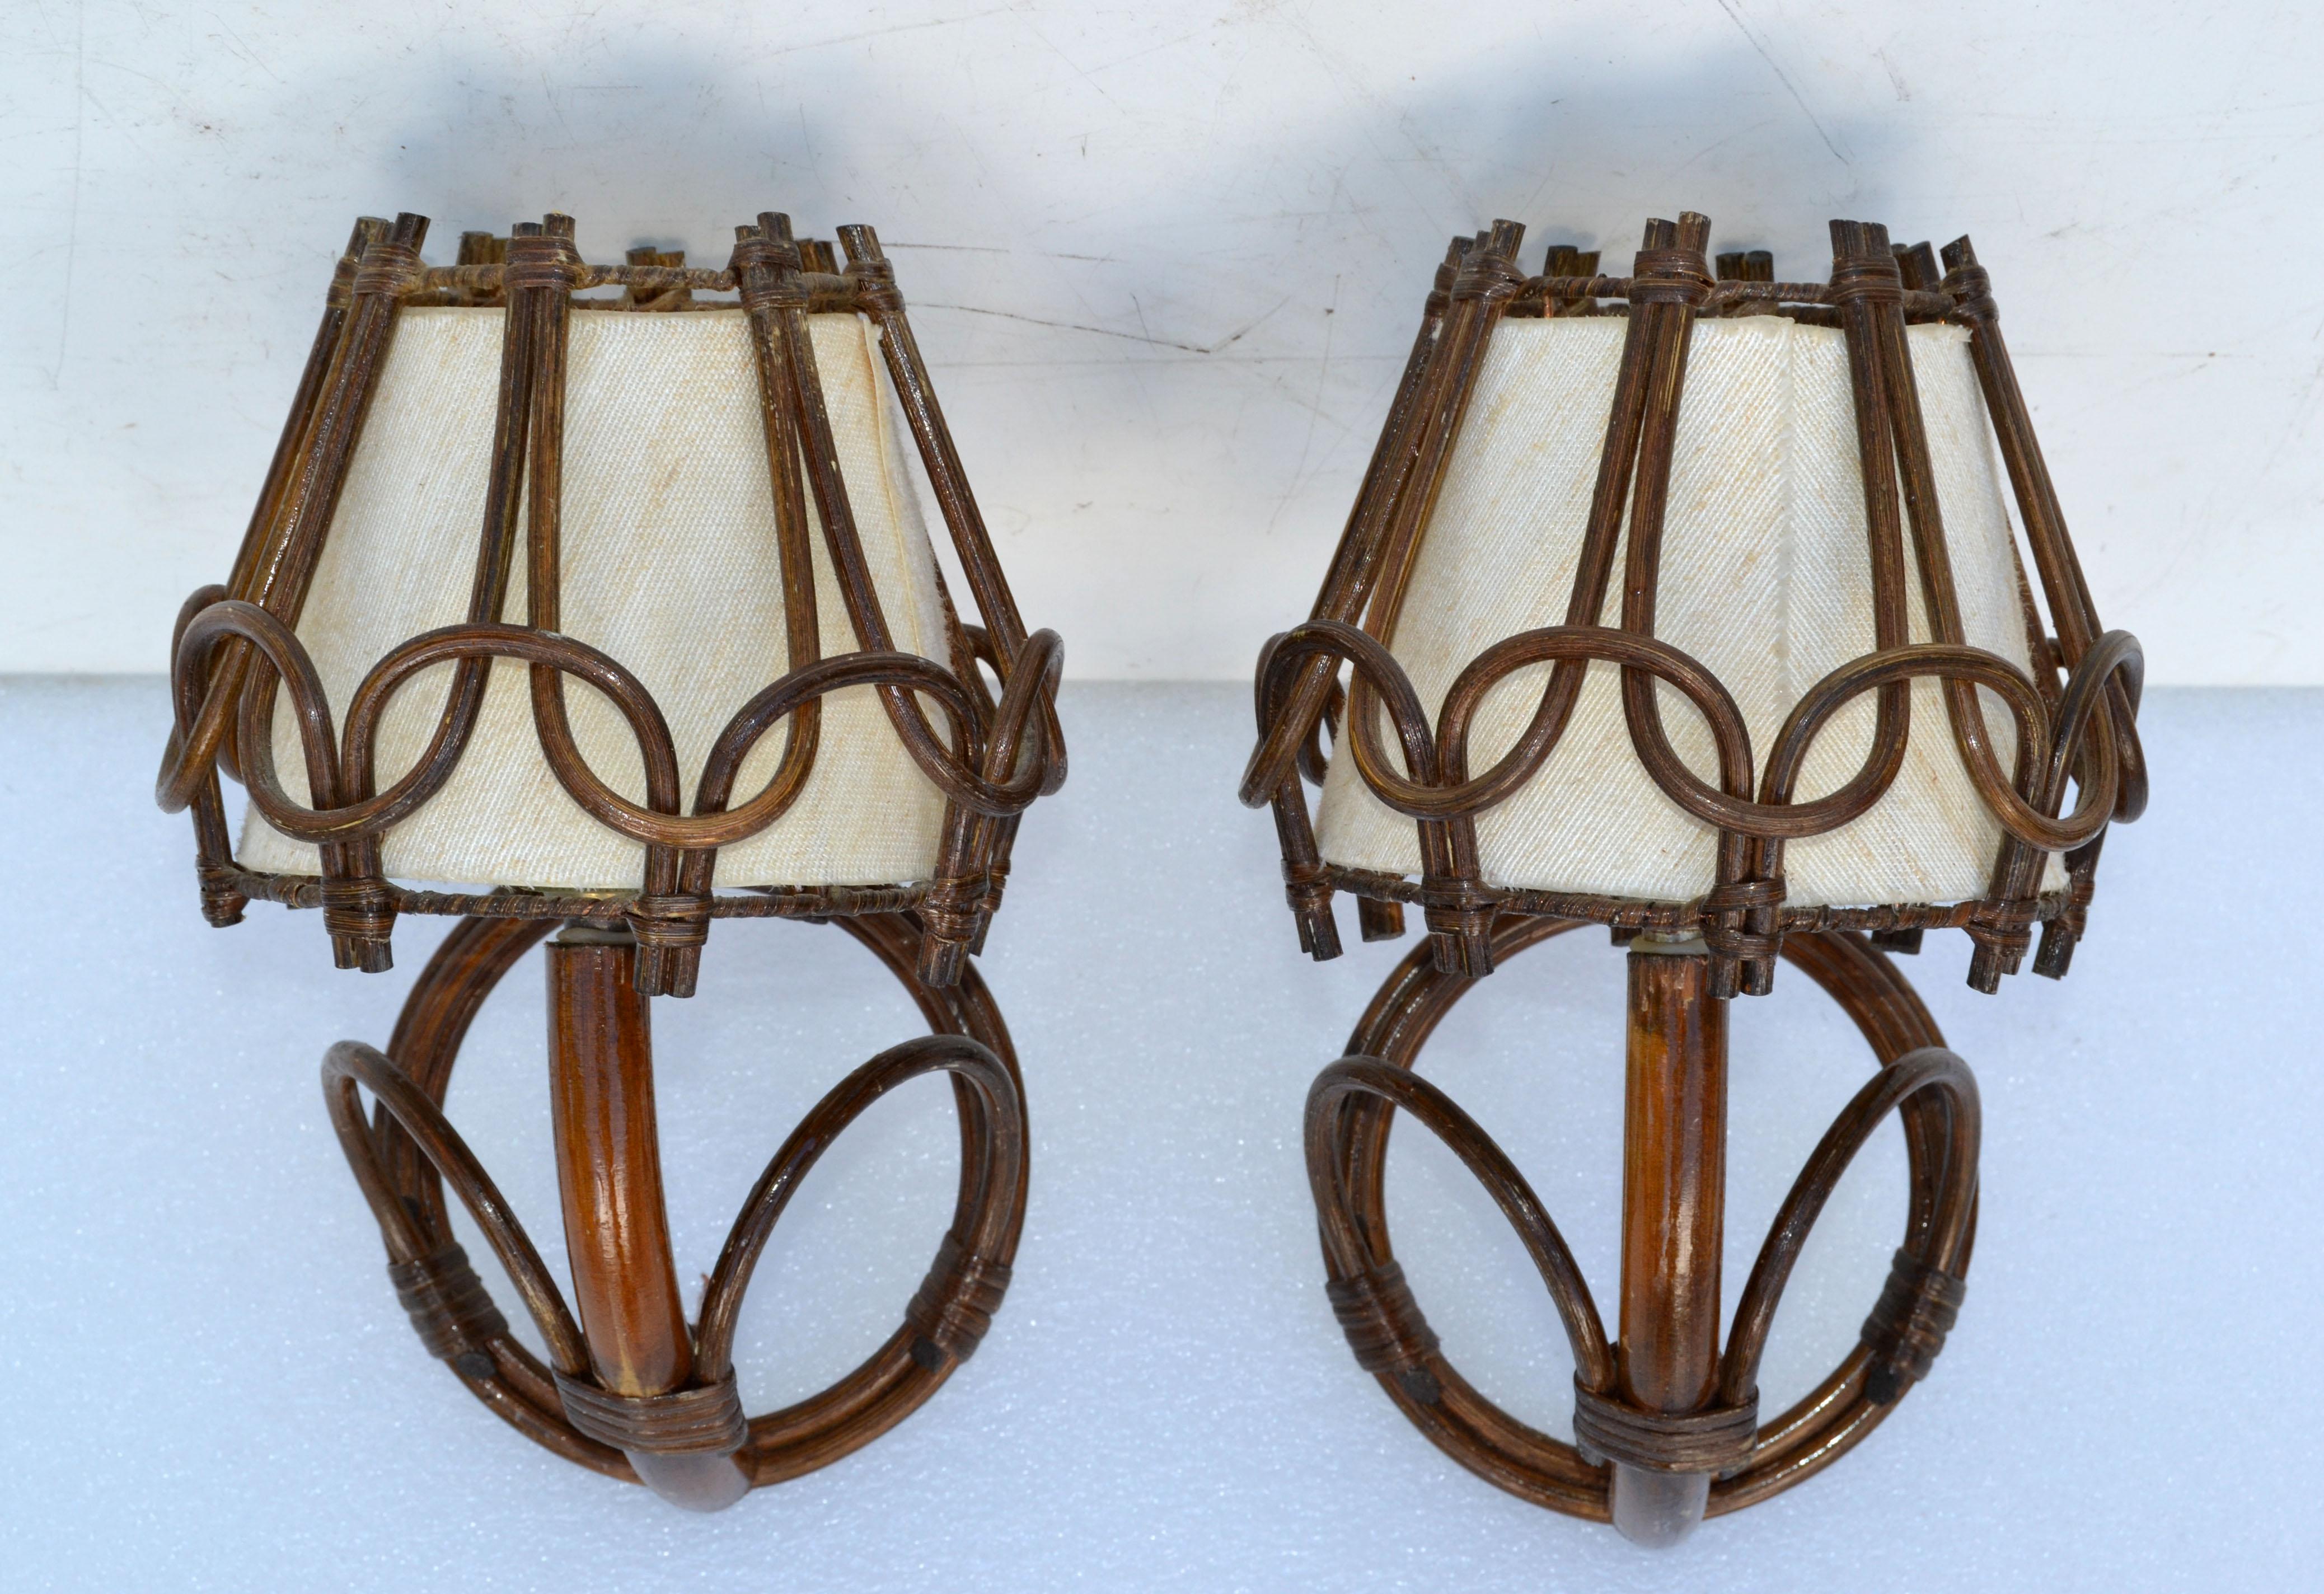 Organic Bend Bamboo Sconce Woven Bamboo Cased Fiber Shades France 1950, Pair For Sale 1